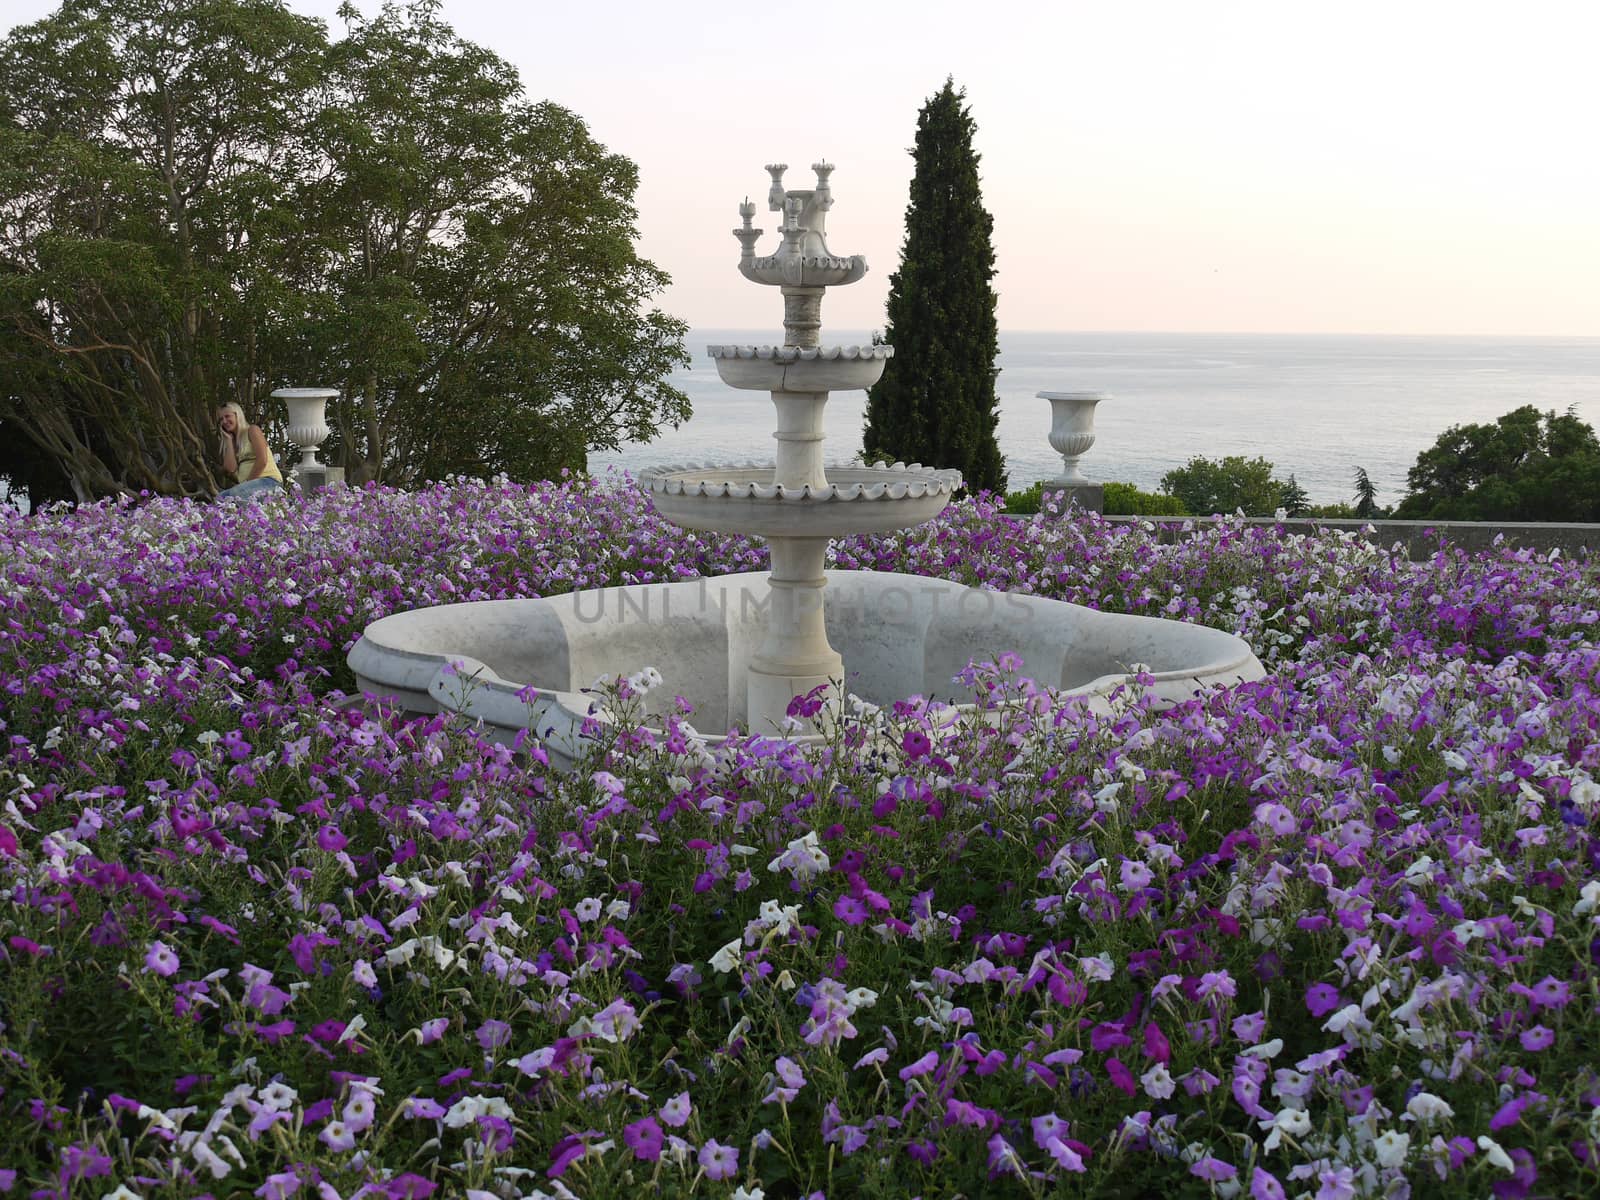 The flower bed is densely planted with white and purple petuniums around the idle fountain on the beach by Adamchuk